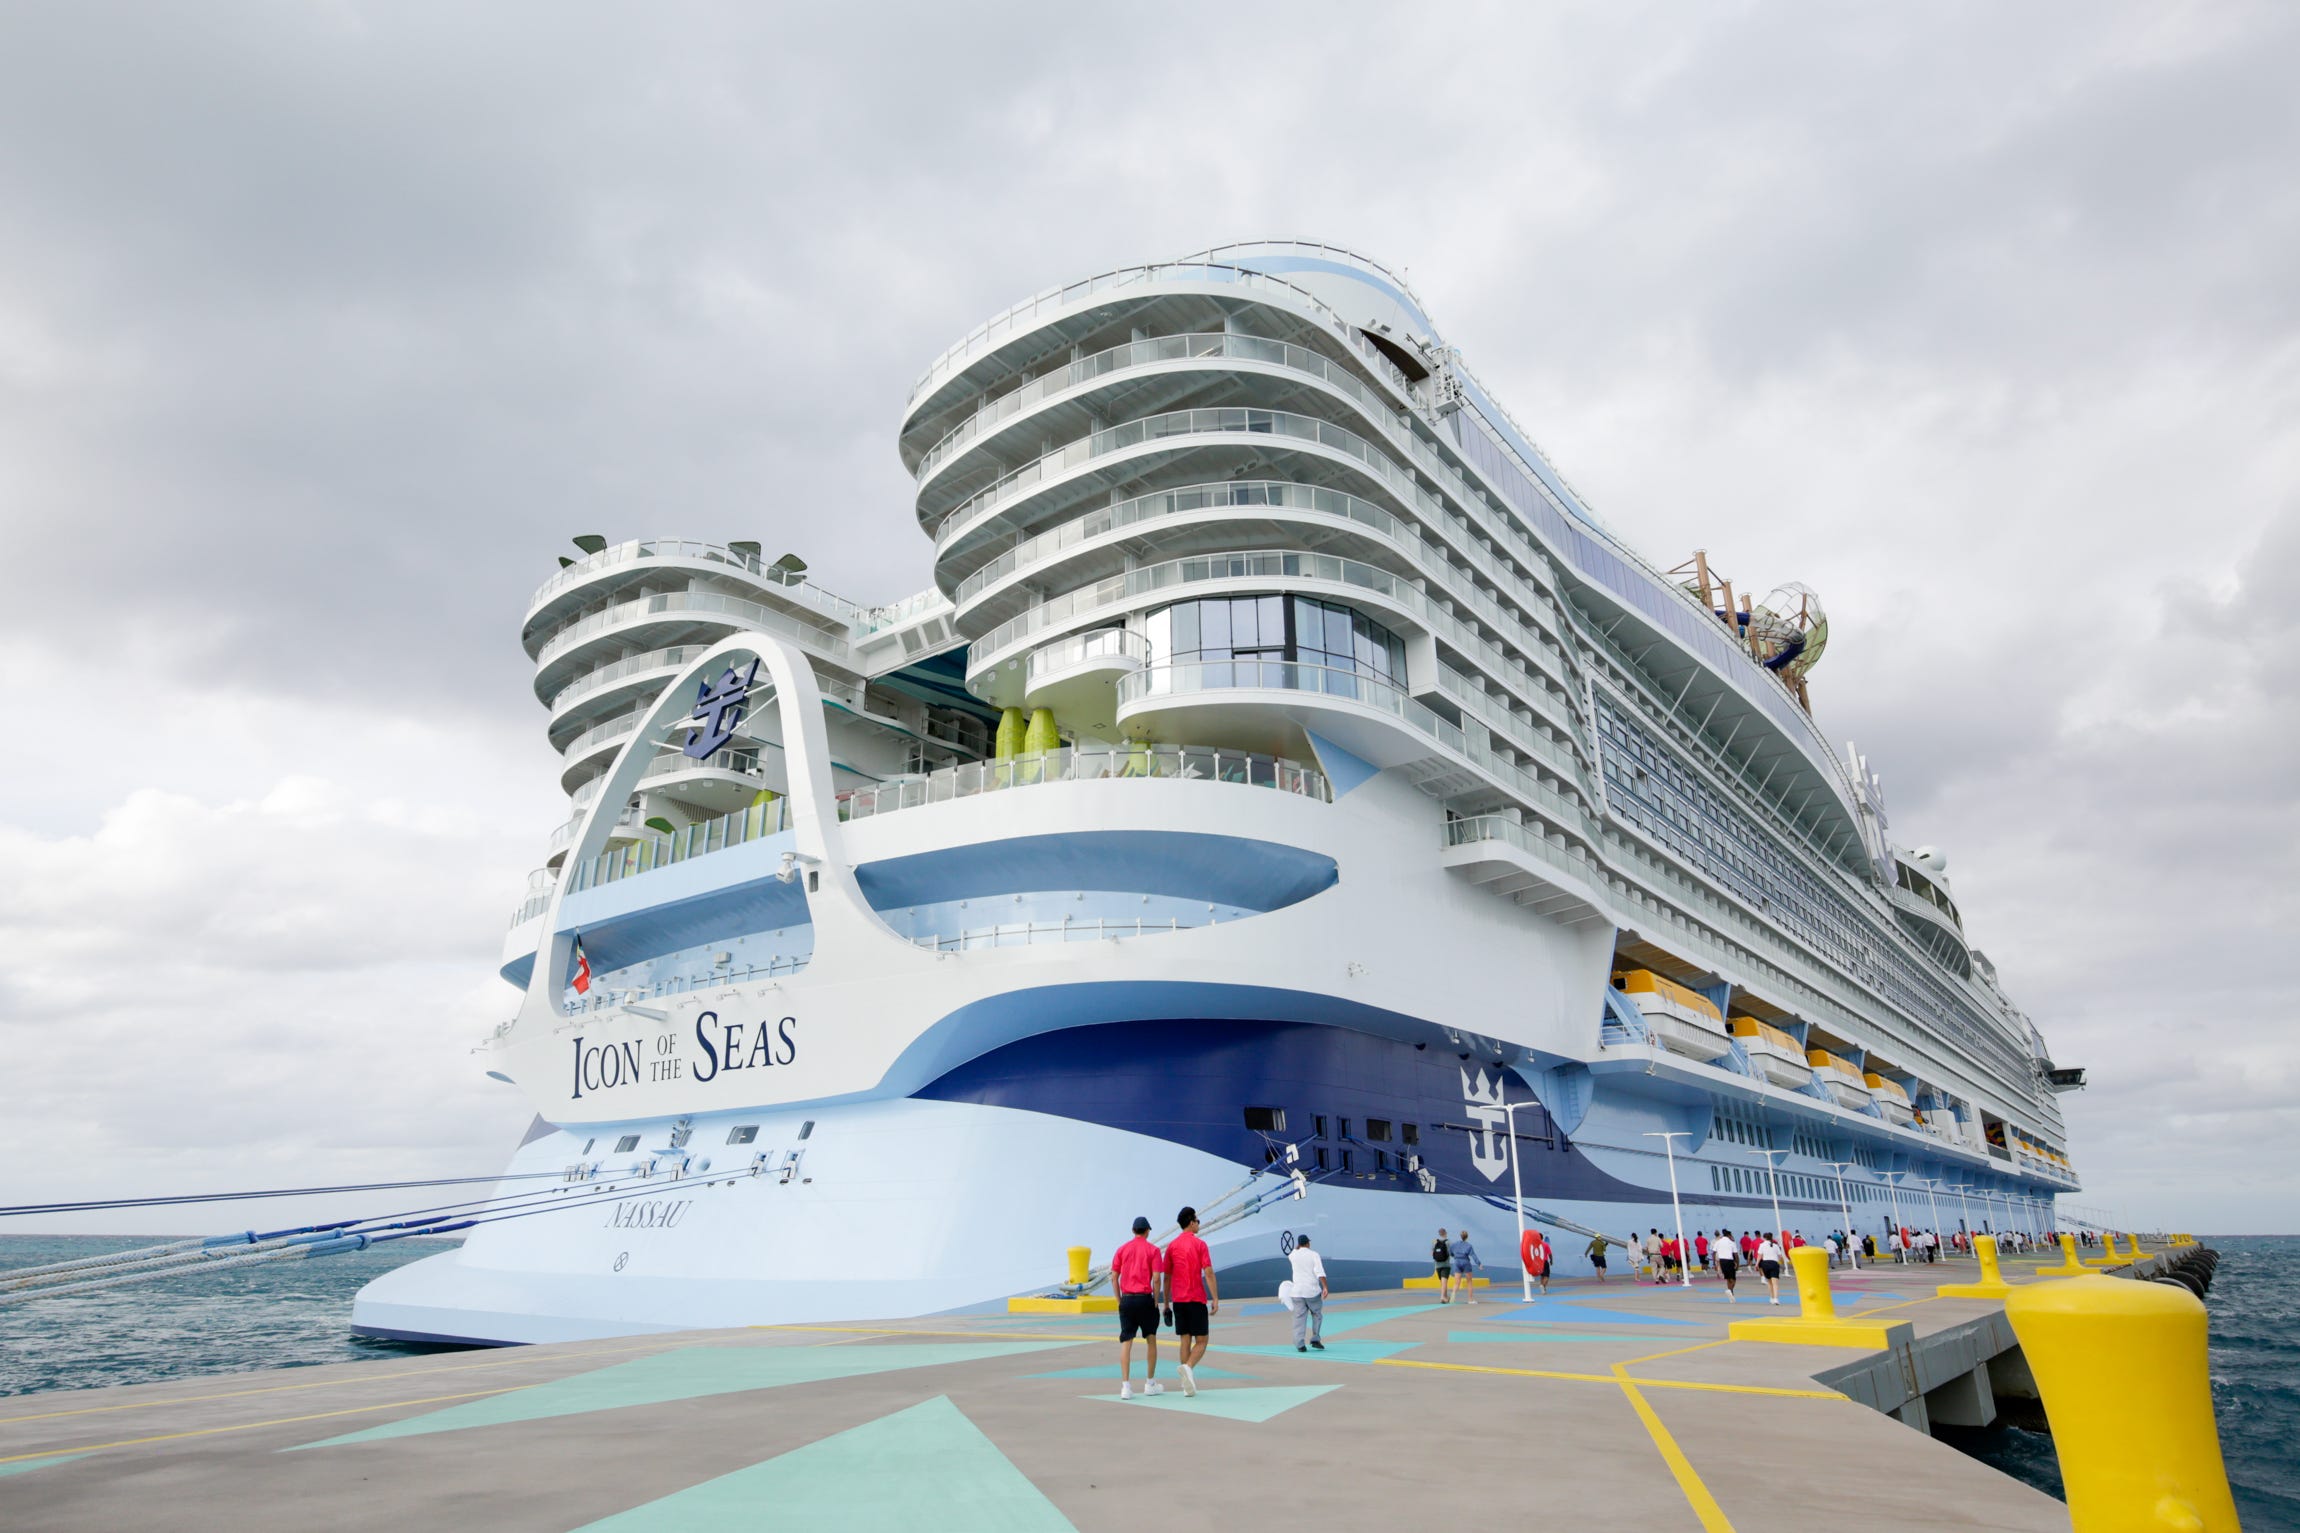 <ul class="summary-list"><li><a href="https://www.businessinsider.com/icon-of-the-seas-wonder-of-the-seas-royal-caribbean-2024-1">Royal Caribbean's Icon of the Seas</a> will begin its first seven-night sailings in January </li><li>The new world's largest cruise ship has unprecedented features like a six-slide water park.</li><li>These are the nine things travelers should know about what it's like on the new mega-ship.</li></ul><p>I was one of the first guests to sail on <a href="https://www.businessinsider.com/things-about-royal-caribbean-icon-of-the-seas-2024-1">Royal Caribbean's newest <strong>vessel</strong>: The $2 billion Icon of the Seas</a>, the world's largest cruise ship.</p><p>Yes, it was giant. Yes, I've never seen anything like it. And yes, it was a sensory overload. (I think I need a vacation from this vacation.)</p><p>The <a href="https://www.businessinsider.com/photos-royal-caribbean-new-icon-of-the-seas-cruise-ship-2022-10">Icon of the Seas</a> ship is unlike any existing floating resort. As the first ship in Royal Caribbean's new Icon class, the 250,800-gross-ton vessel overshadows virtually all of its predecessors — in size and in the number of water slides, pools, dining venues, and stateroom options.</p><p>Ahead of its January 27 debut, Royal Caribbean invited me on a complimentary, three-night preview sailing. Unfortunately, I spent most of my time lost and overwhelmed.</p><p>To prevent this for yourself, these are the nine things you should know before your <a href="https://www.businessinsider.com/royal-caribbean-icon-of-the-seas-trip-price-expensive-2023-11">2024 Icon of the Seas vacation</a>.</p><div class="read-original">Read the original article on <a href="https://www.businessinsider.com/royal-caribbean-icon-of-the-seas-cruise-ship-top-tips-2024-1">Business Insider</a></div>